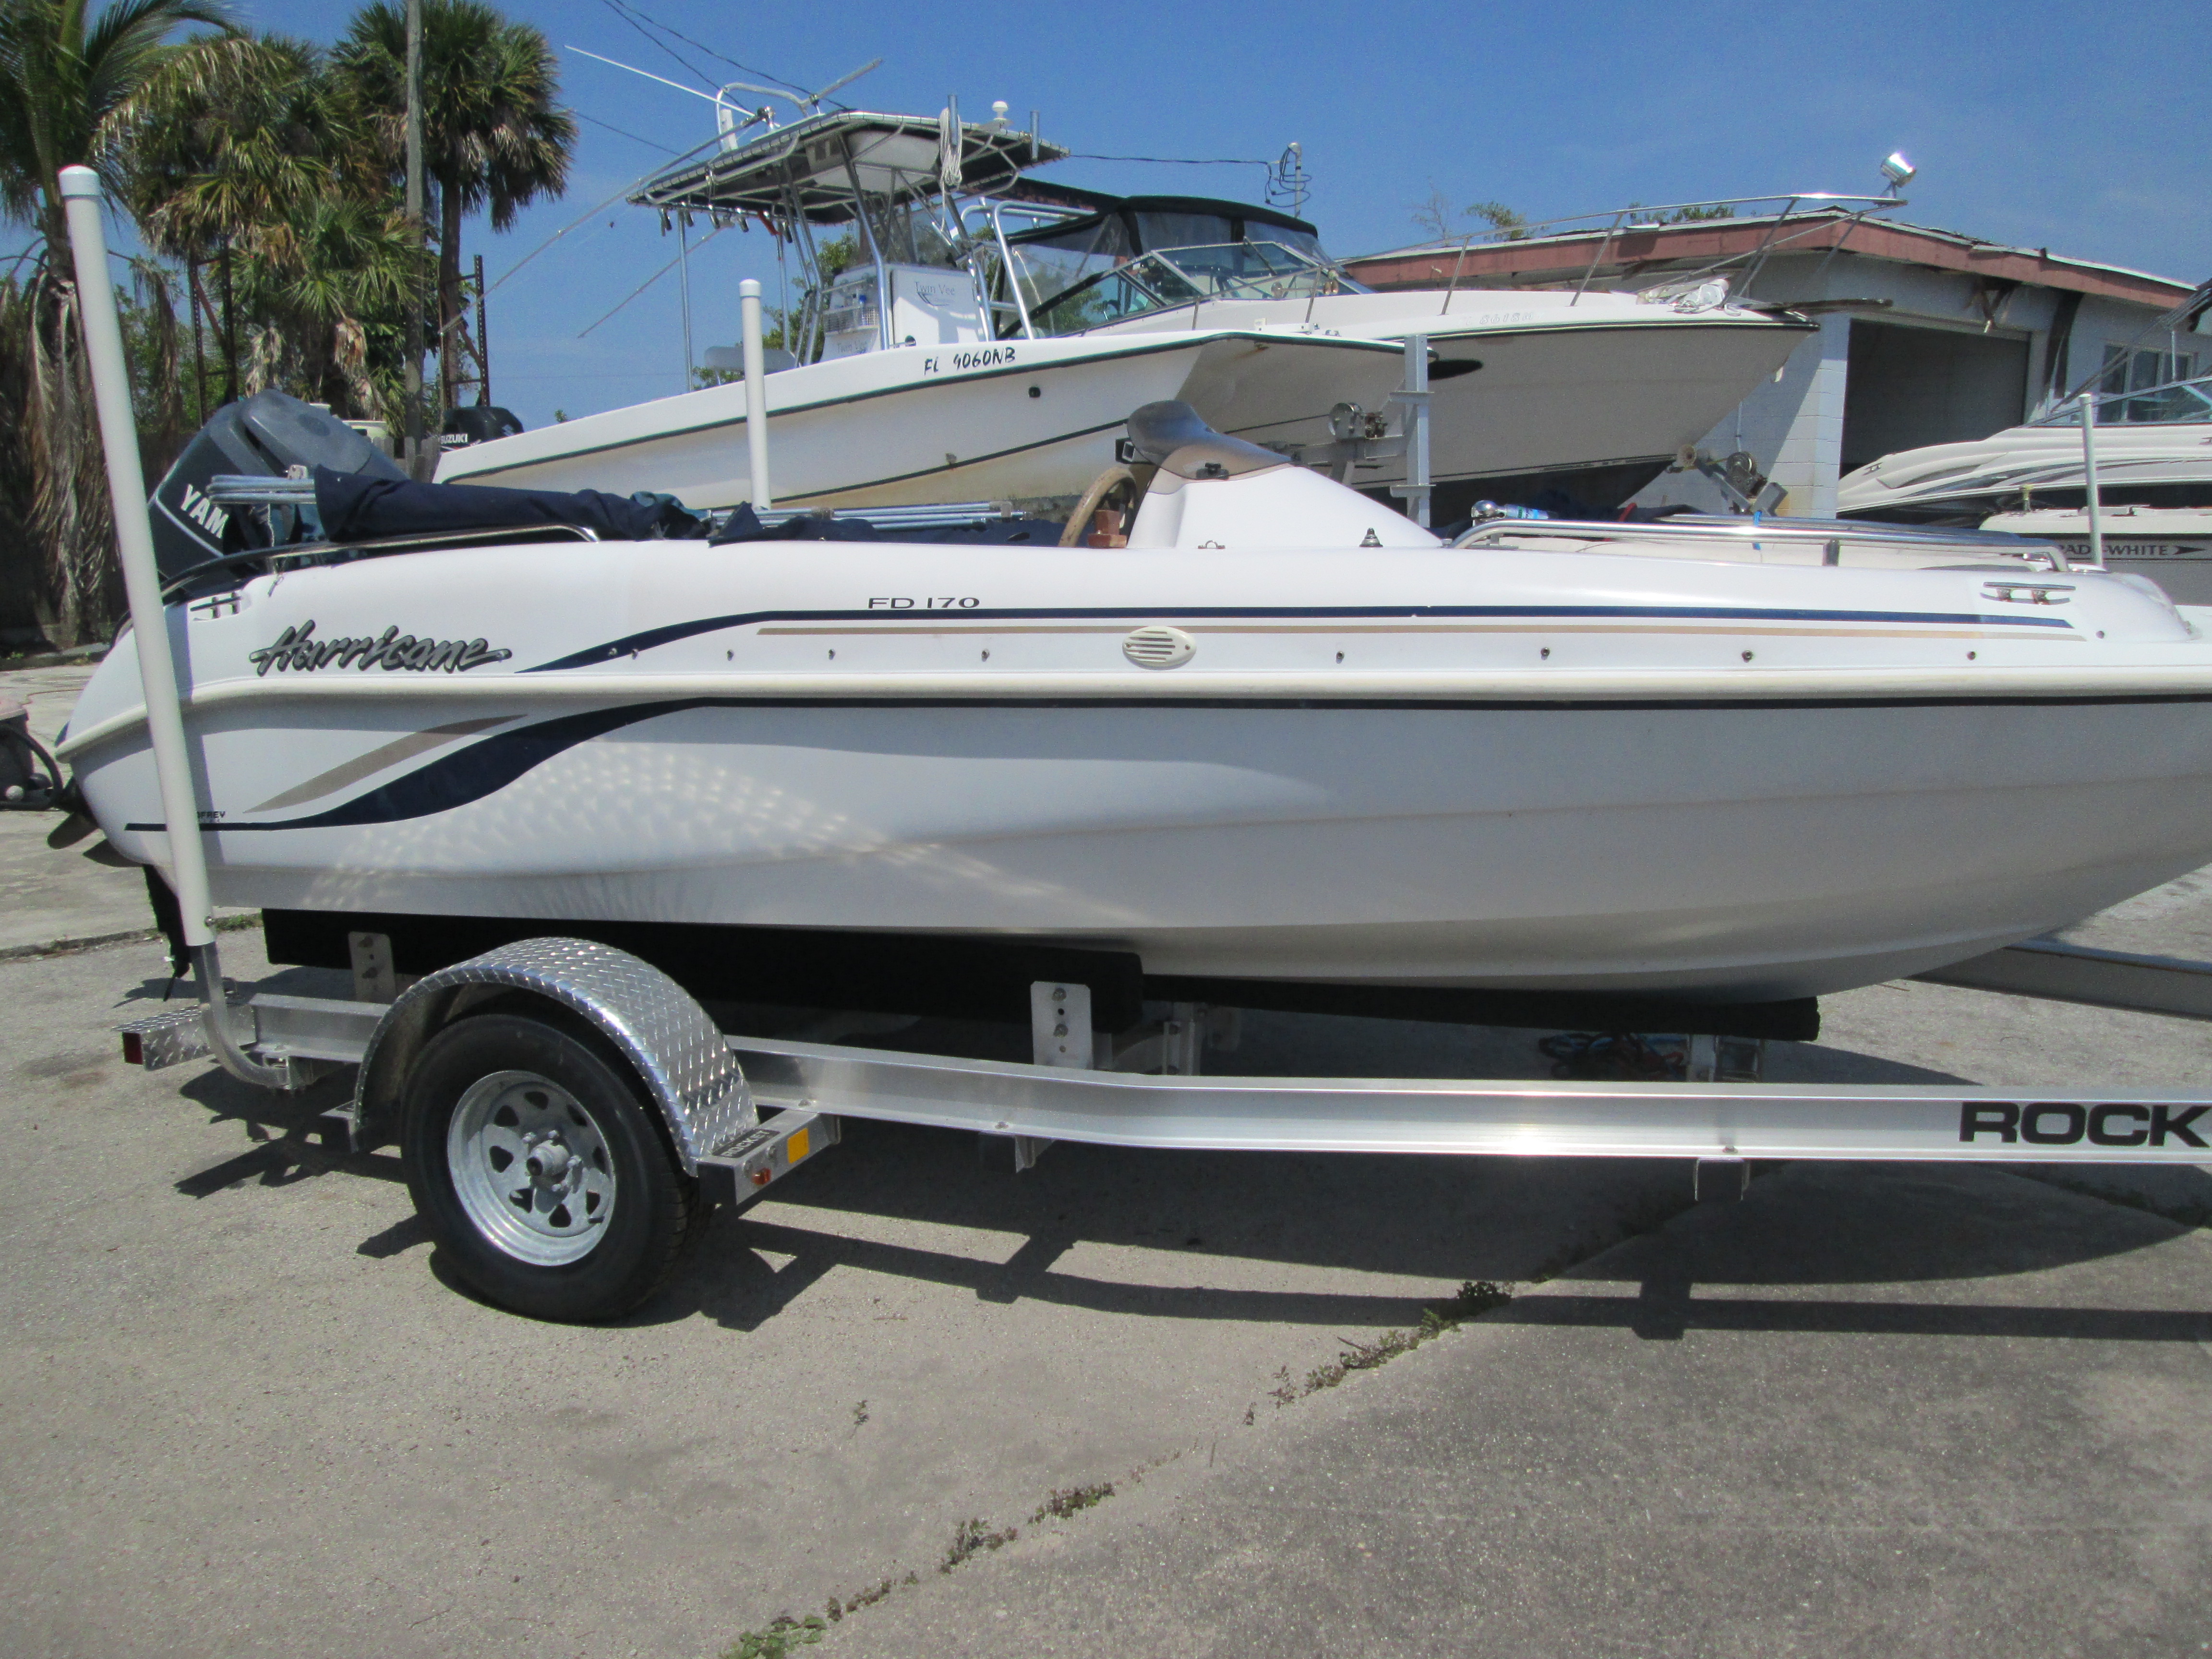 2000 Godfrey Hurricane FD GS 170 Power boat for sale in Hutchinson Is, FL - image 5 